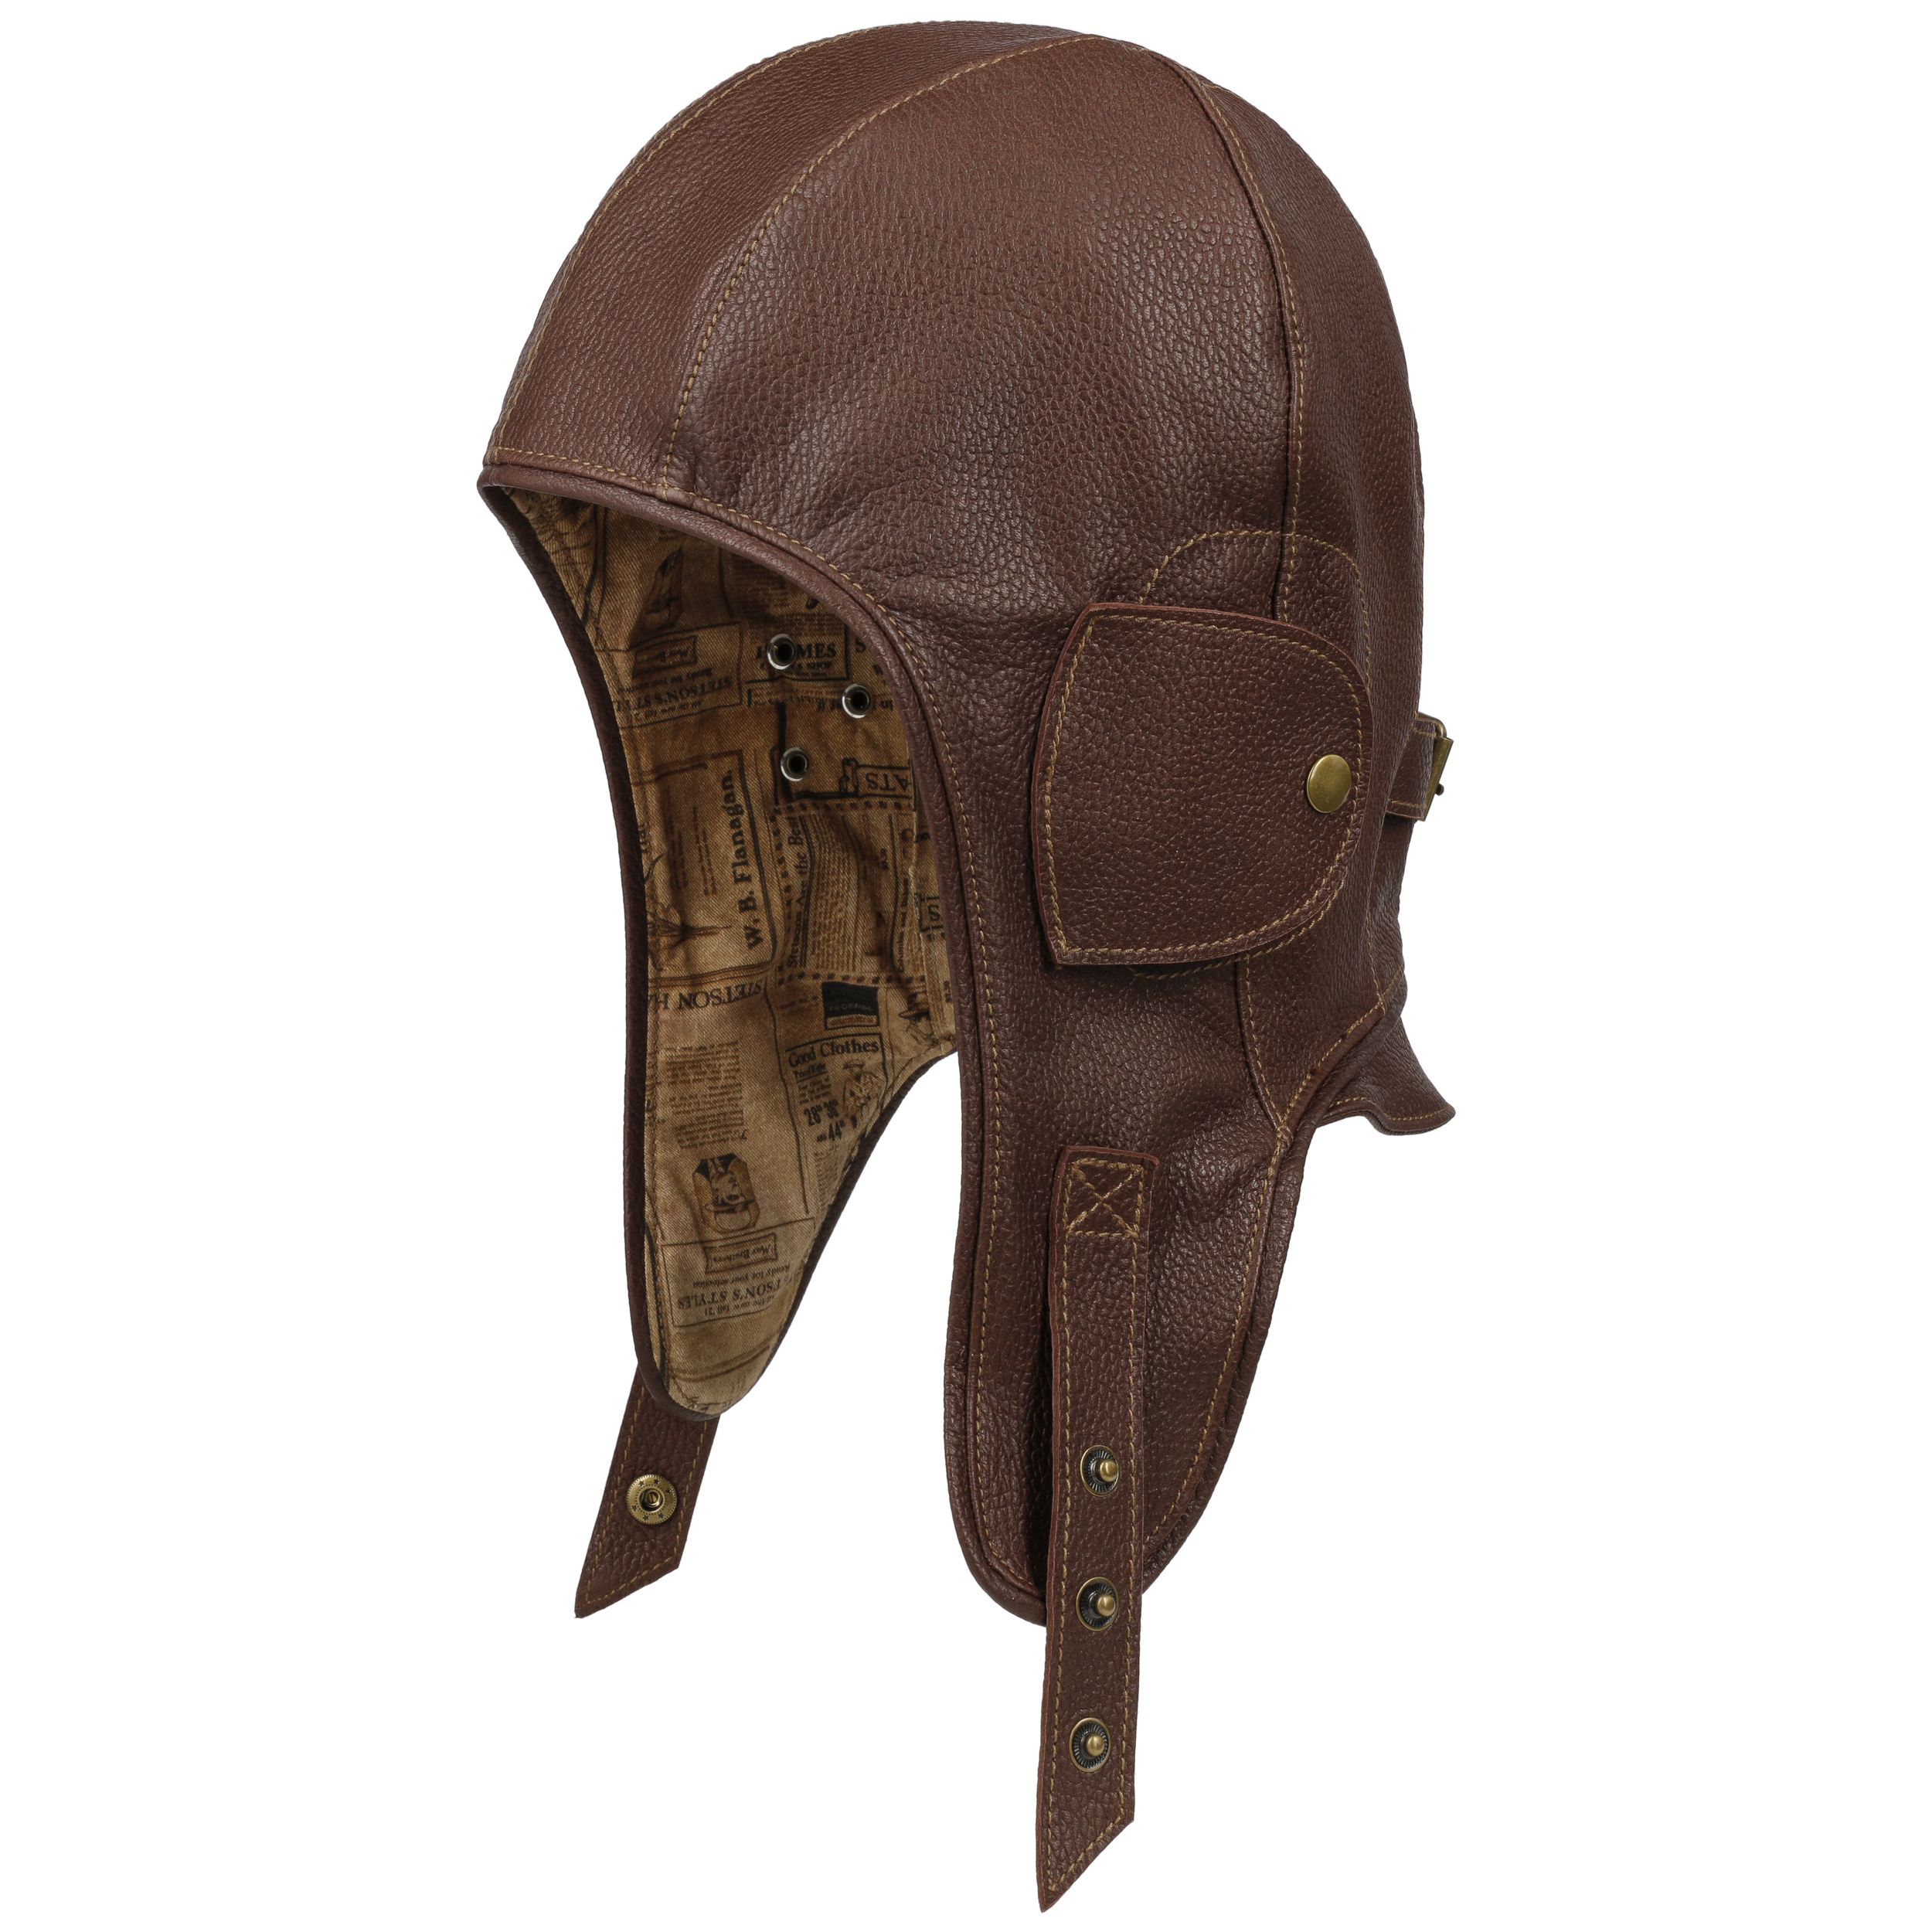 Classic Convertible Aviator Hat by Stetson - 199,00 €